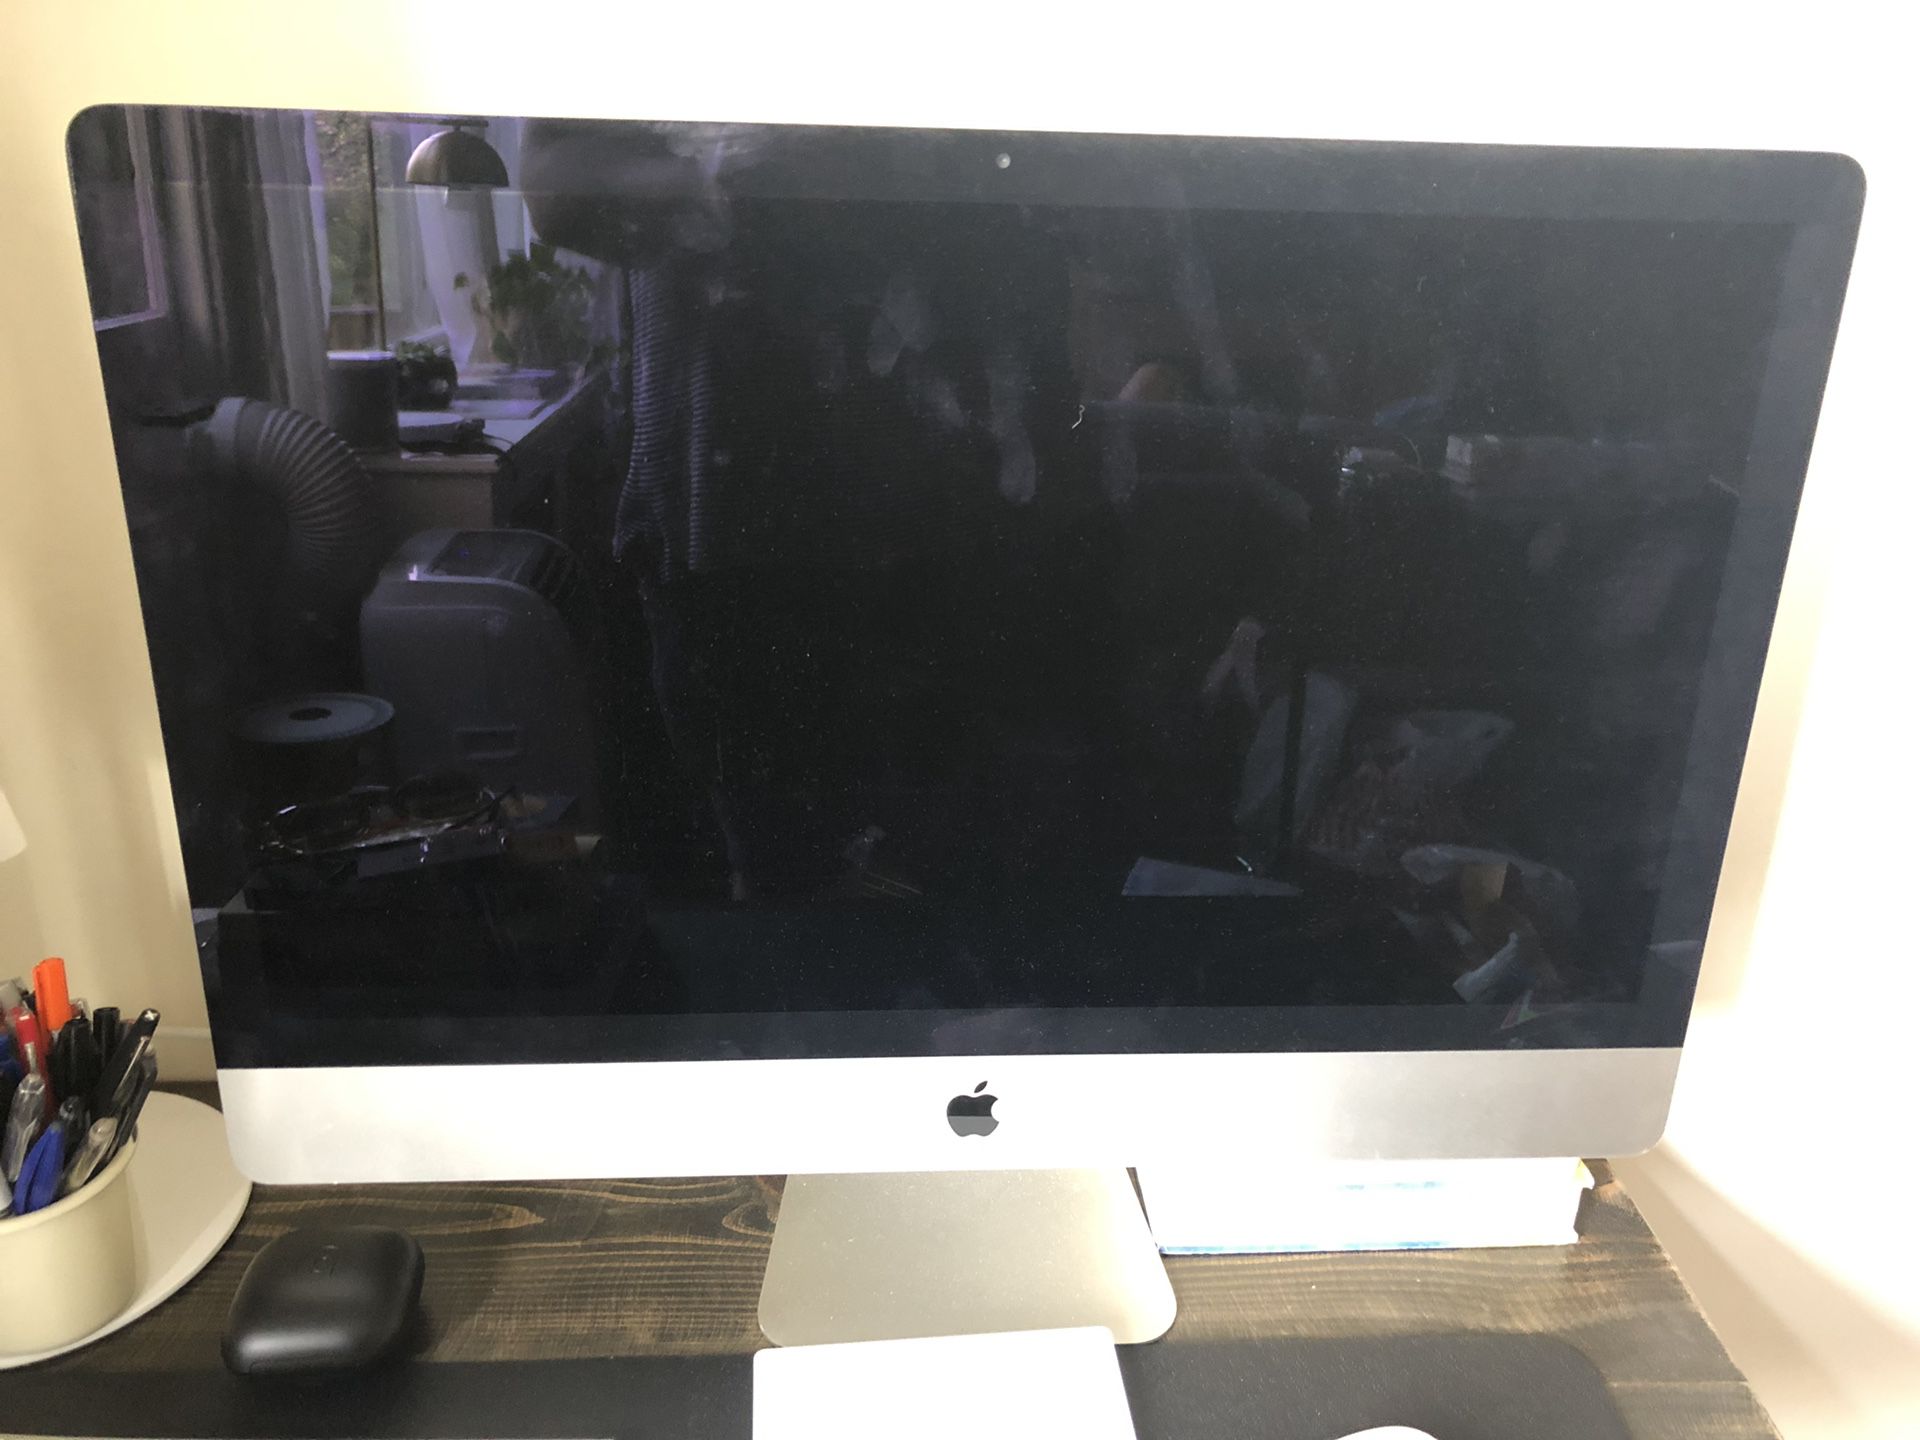 iMac - 27 inch with trackpad, mouse and keyboard